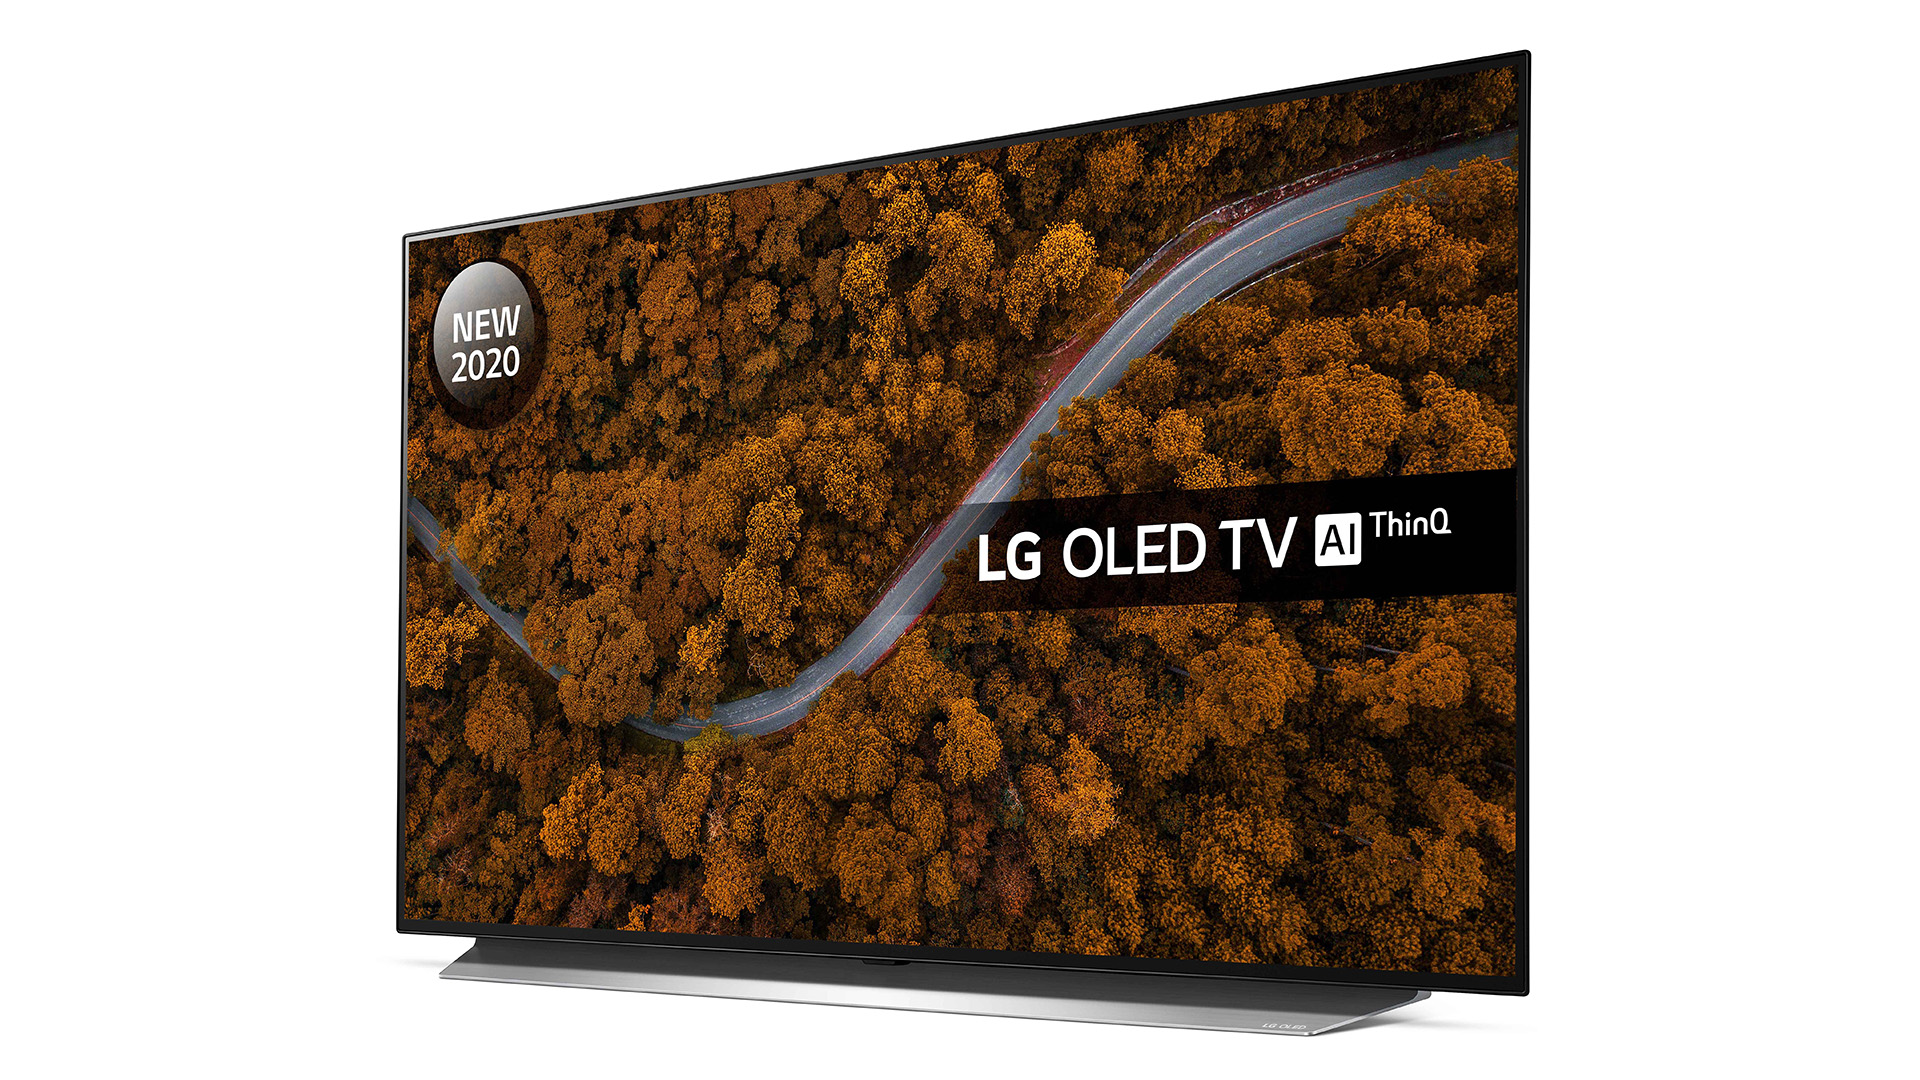 The best Super Bowl TV deal? Save $800 on LG's 65-inch CX OLED TV